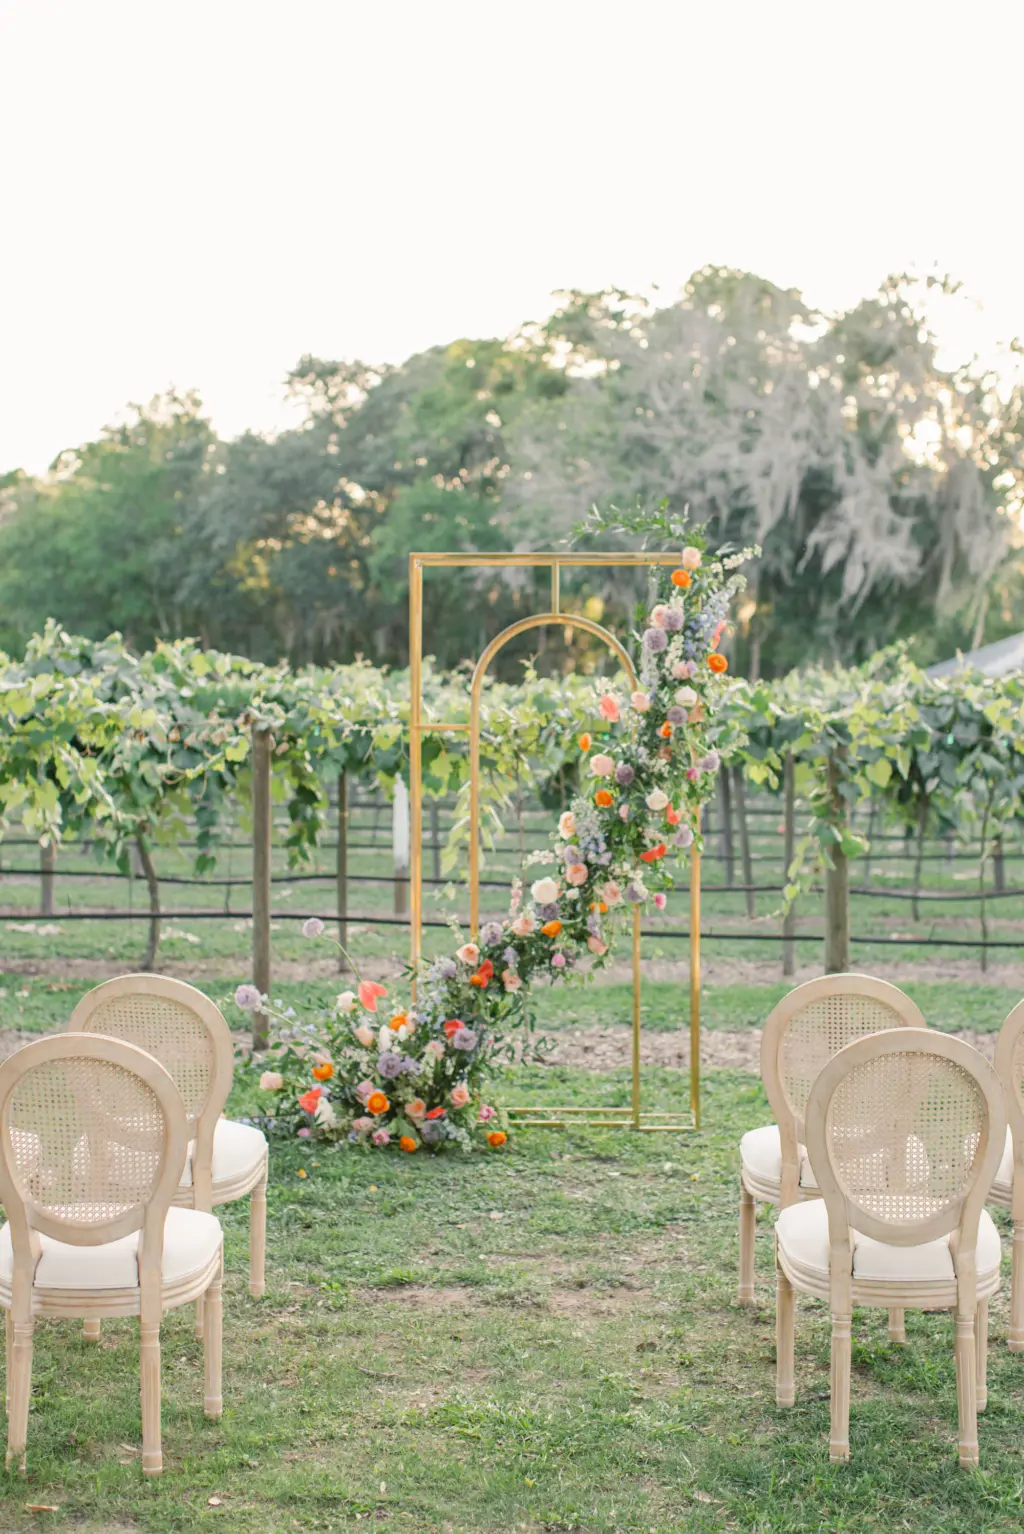 Copper Wedding Ceremony Arch with Whimsical Cascading Pastel Floral Arrangement | Cane Rattan Wedding Chairs | Sarasota Vineyard Wedding Inspiration | Tampa Bay Florist Save The Date Florida | Planner MDP Events | Venue Fiorelli Winery